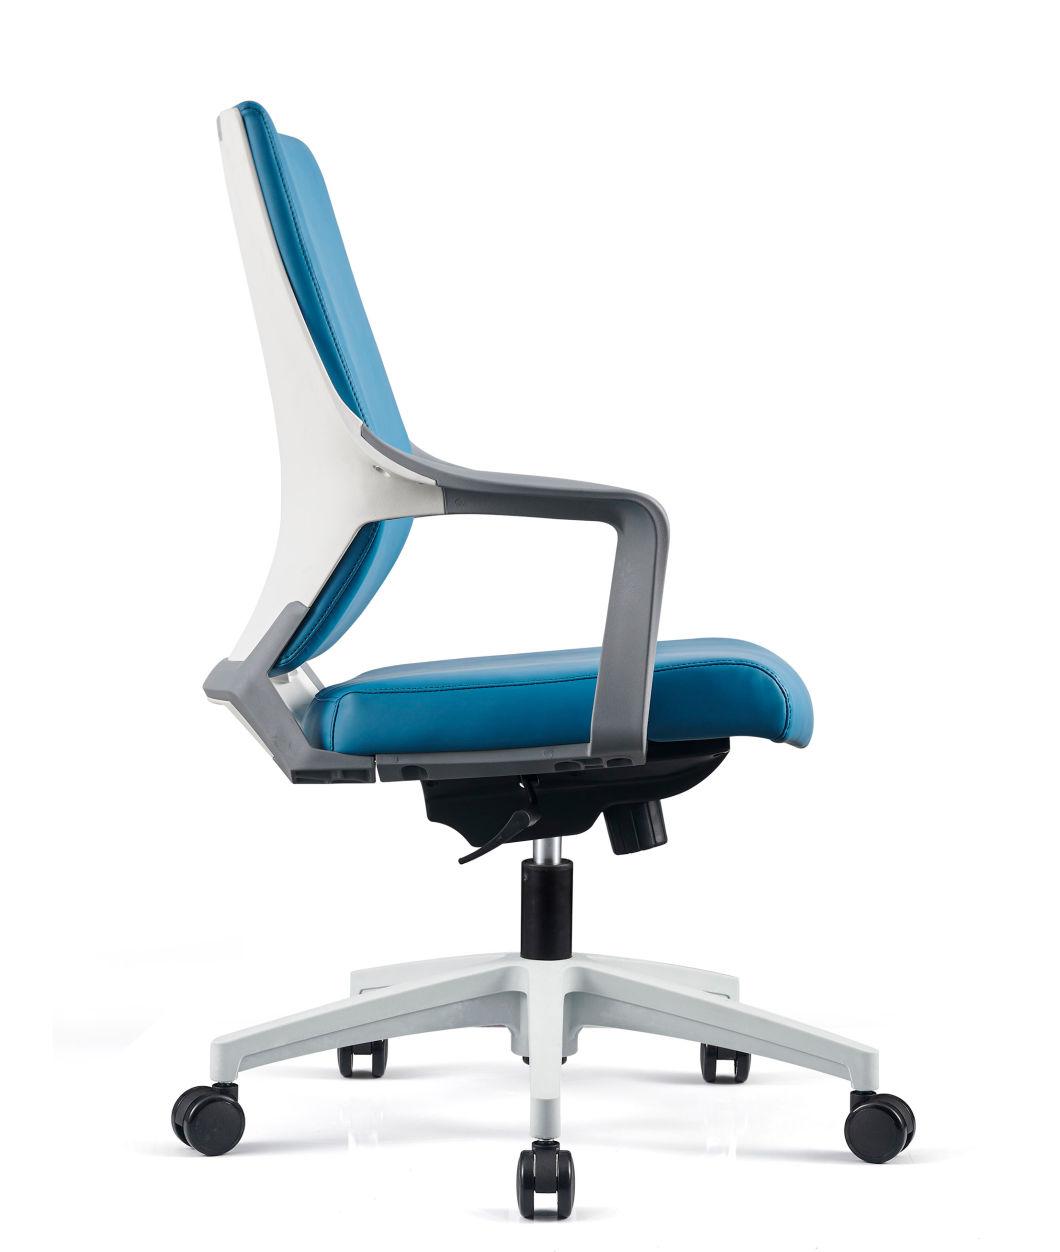 Excellent Manufacture of Exquisite Morden Office Chairs Fabric Chairs Office Furniture